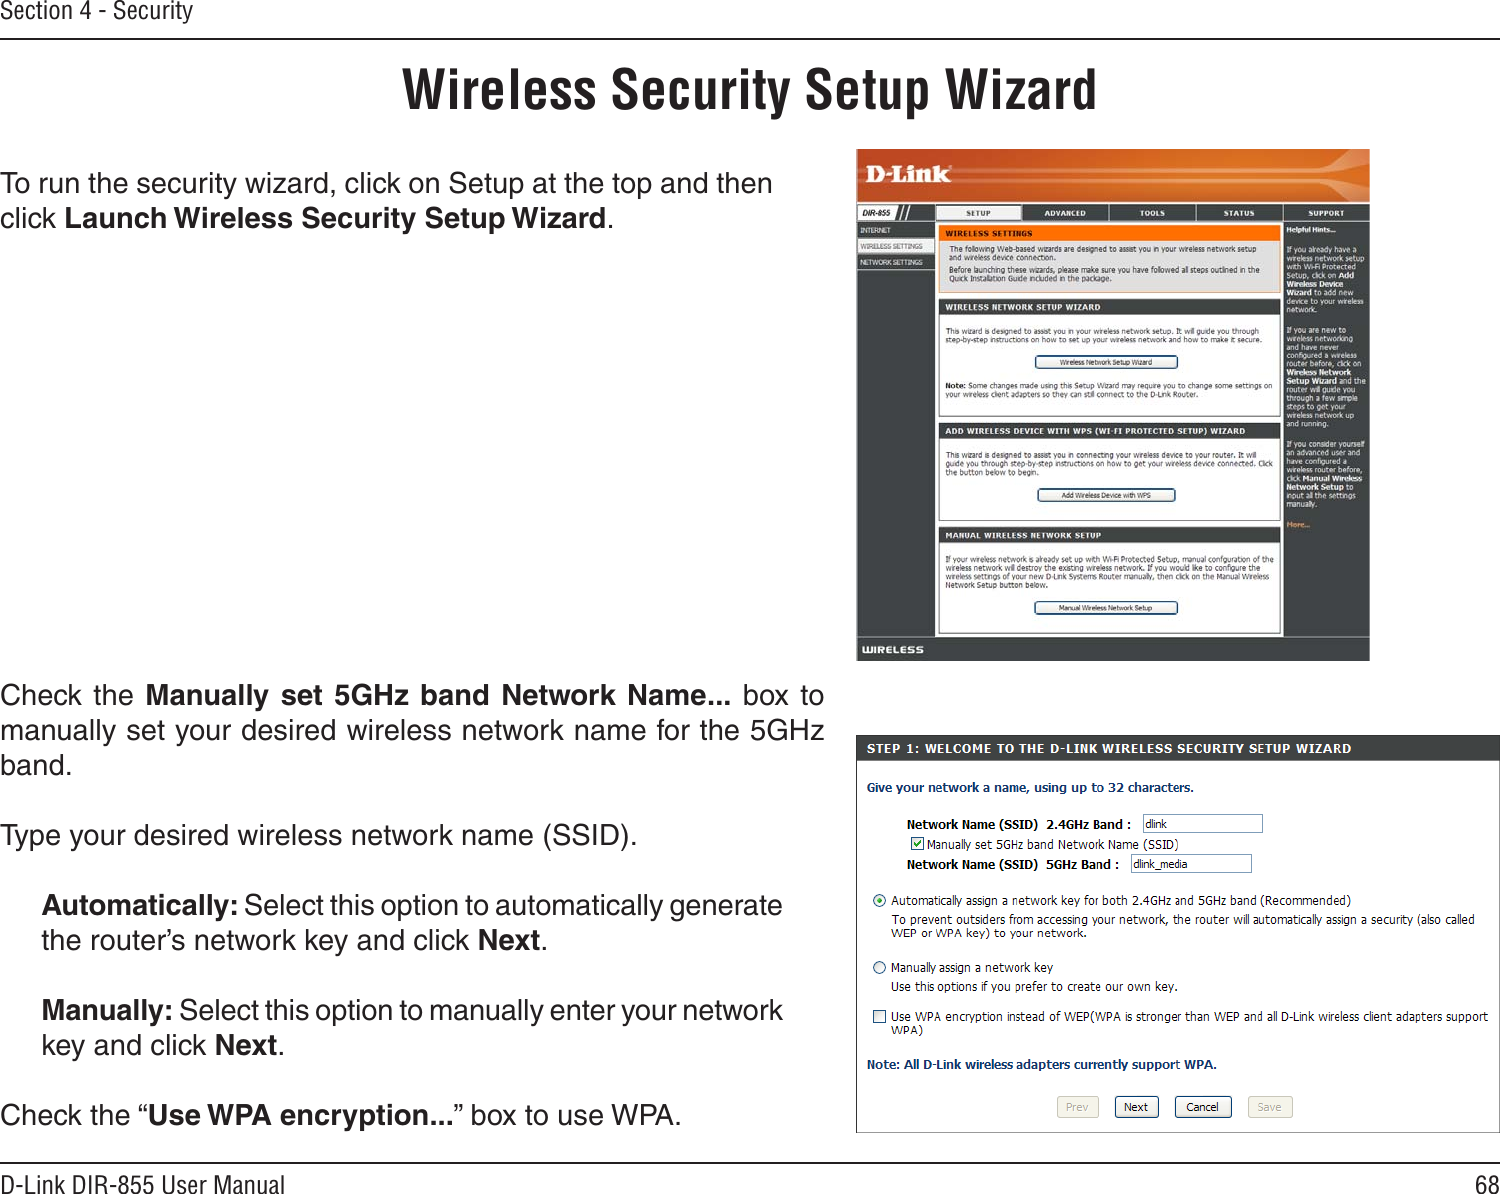 68D-Link DIR-855 User ManualSection 4 - SecurityWireless Security Setup WizardTo run the security wizard, click on Setup at the top and then click Launch Wireless Security Setup Wizard.Check the Manually  set  5GHz  band  Network Name...  box to manually set your desired wireless network name for the 5GHz band.Type your desired wireless network name (SSID). Automatically: Select this option to automatically generate the router’s network key and click Next.Manually: Select this option to manually enter your network key and click Next.Check the “Use WPA encryption...” box to use WPA.